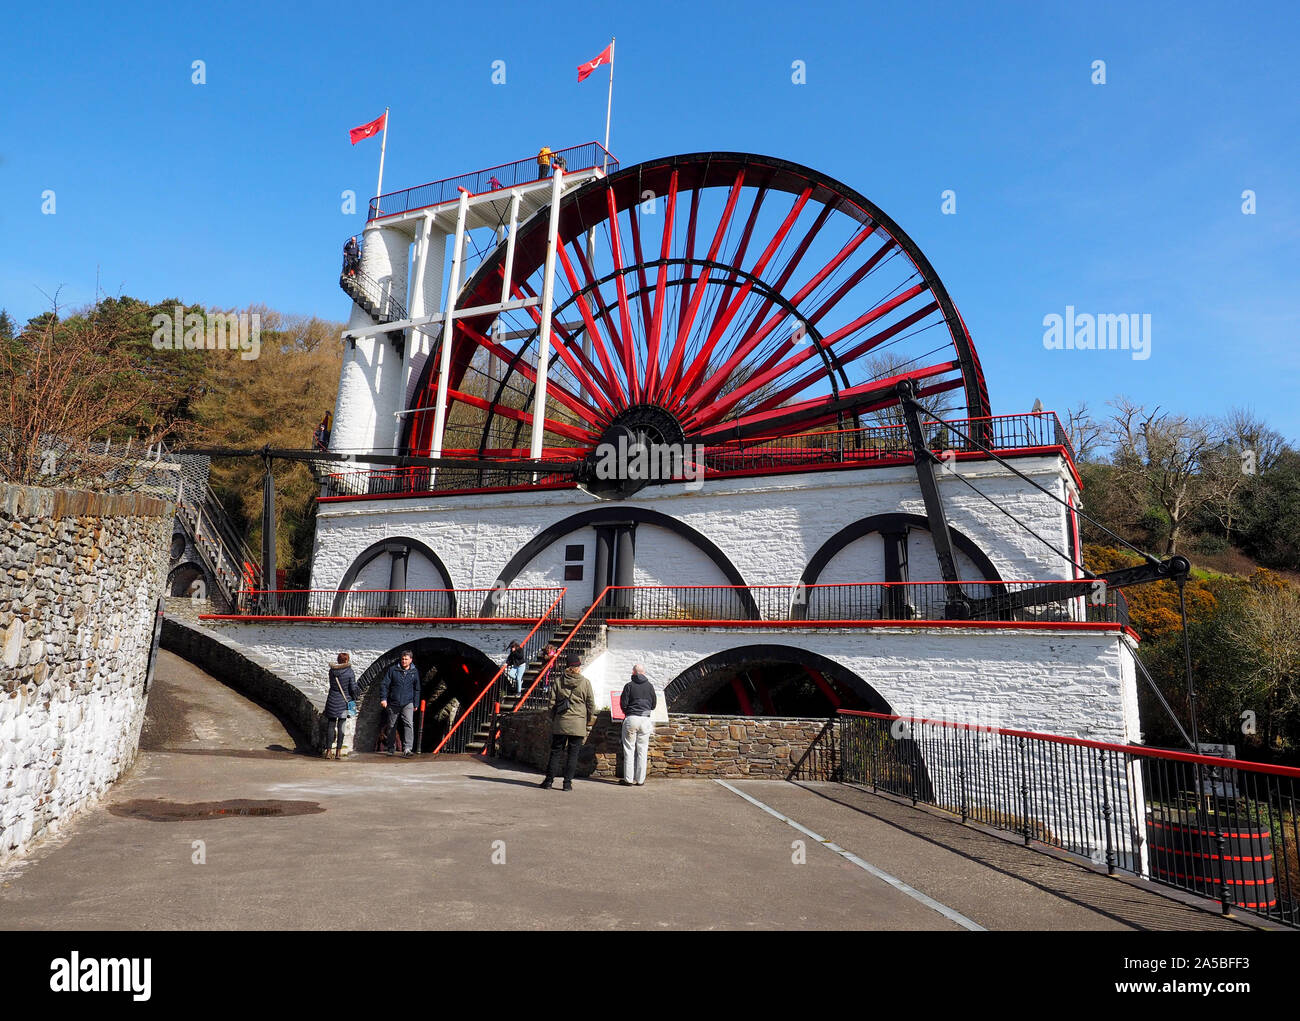 Laxey Wheel, Laxey, Isle of Man, UK, The Laxey Wheel built into the hillside above the village of Laxey, the largest working waterwheel in the world. Stock Photo